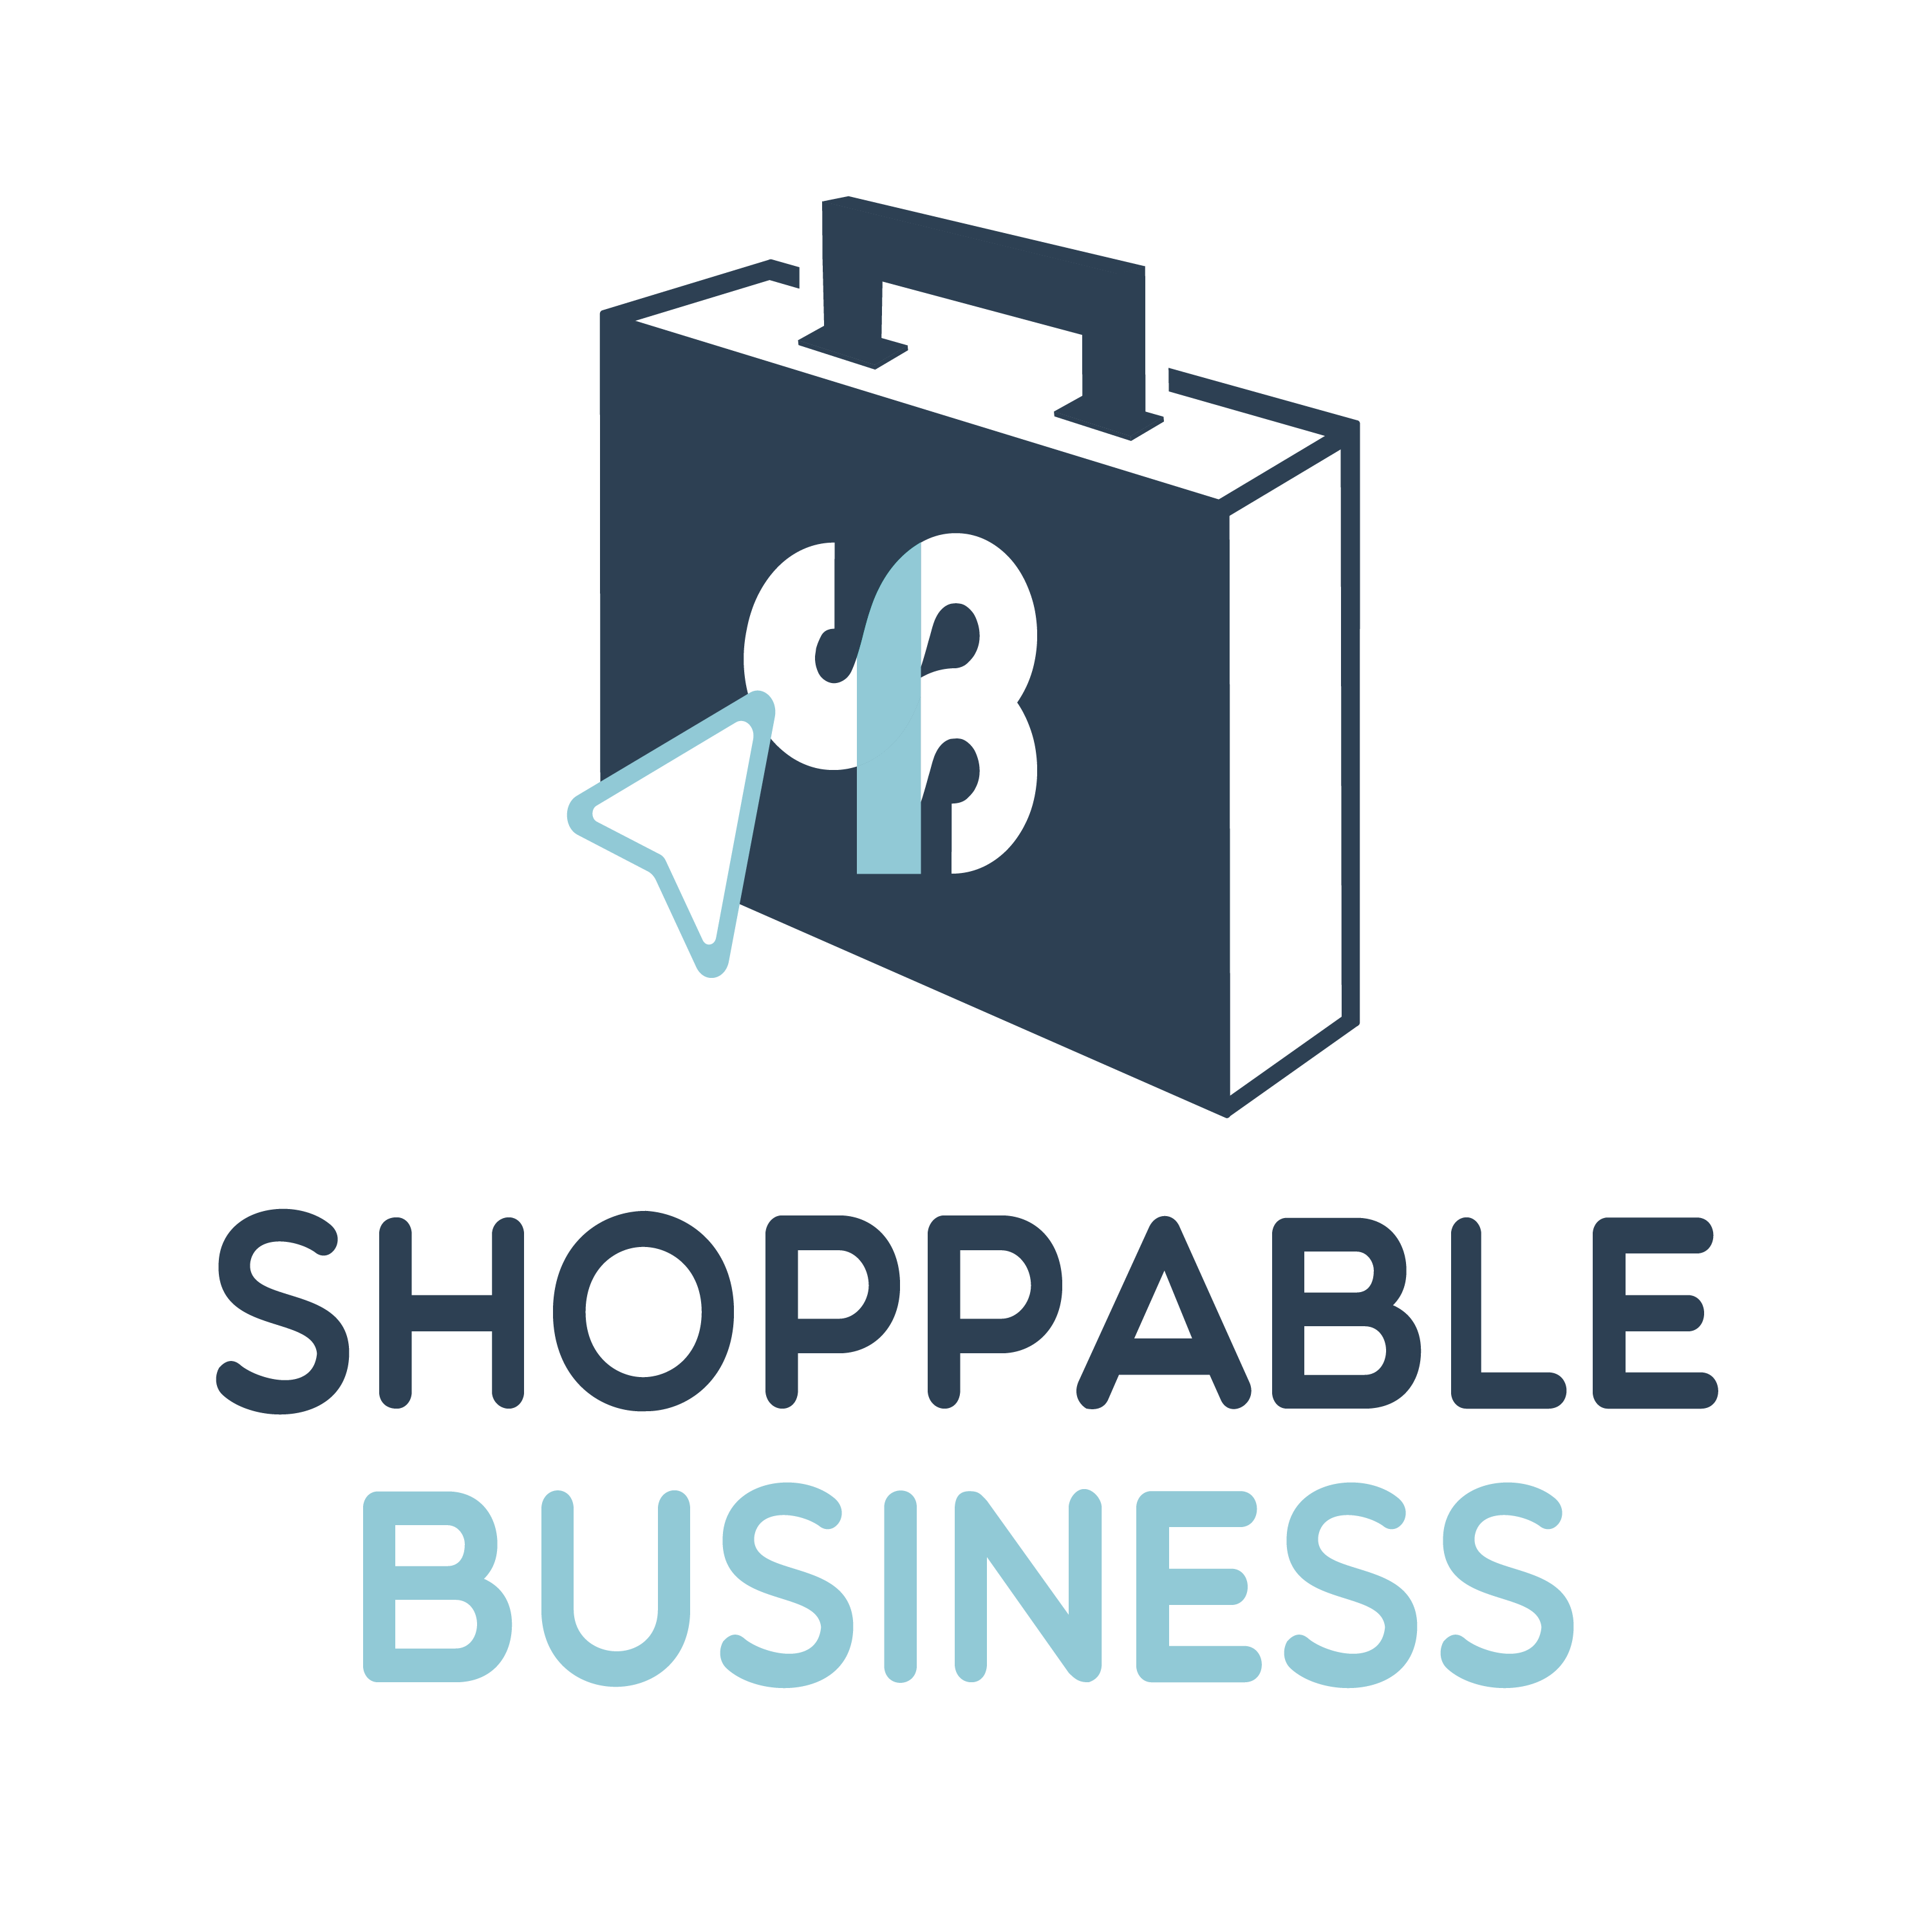 Shoppable: #1 B2B platform for procurement of products in bulk